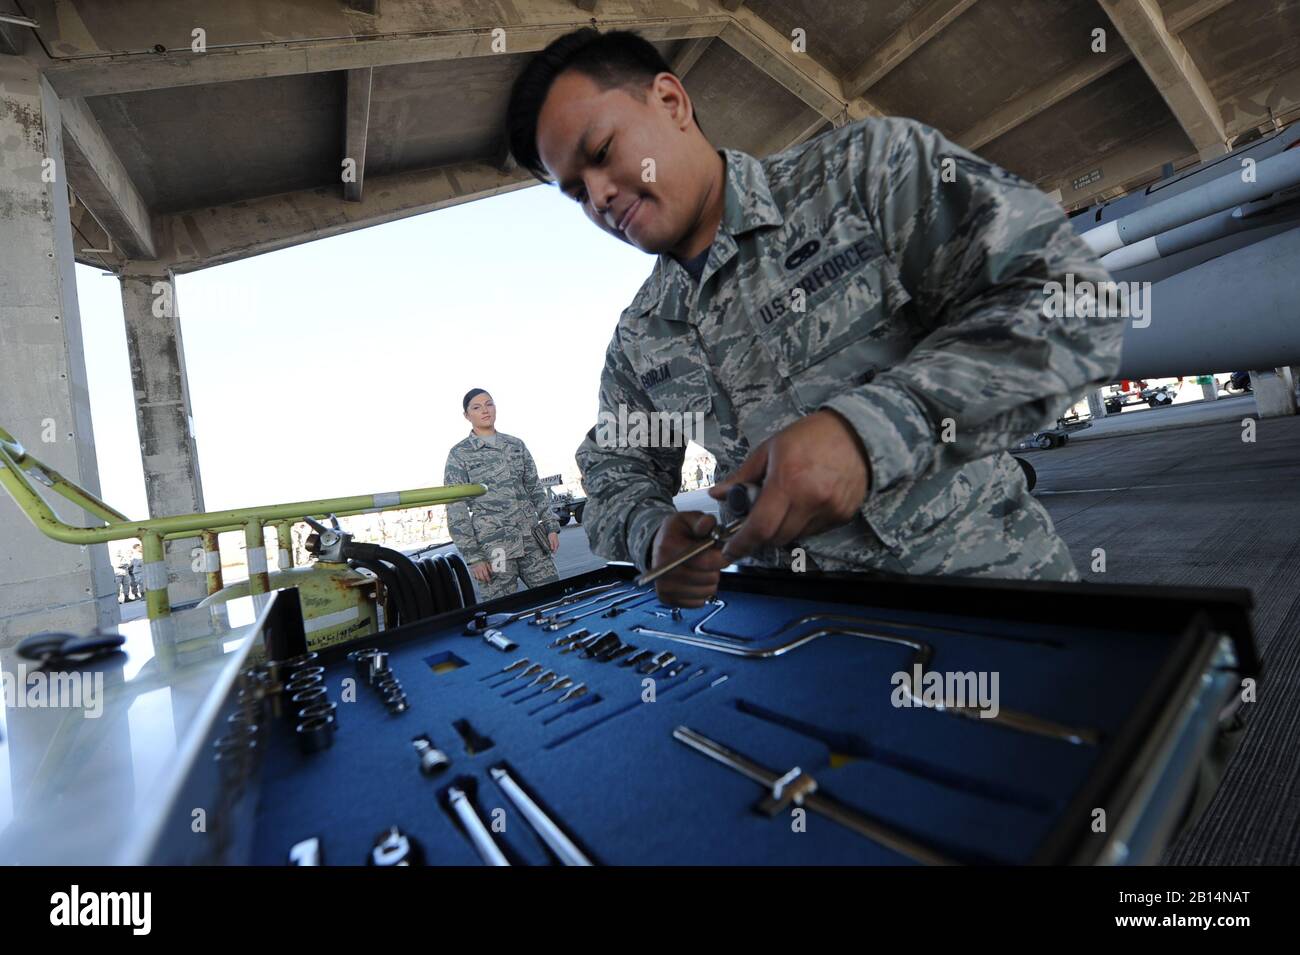 U.S. Air Force Senior Airman Melchorcrispin Borja, a weapons load team member assigned to the 44th Aircraft Maintenance Unit, inspects a tool box during an annual weapons load competition Jan. 3, 2018, on Kadena Air Base, Japan. Once the missiles are loaded, teams must ensure all tools are accounted for. (U.S. Air Force photo by Staff Sgt. Micaiah Anthony) Stock Photo